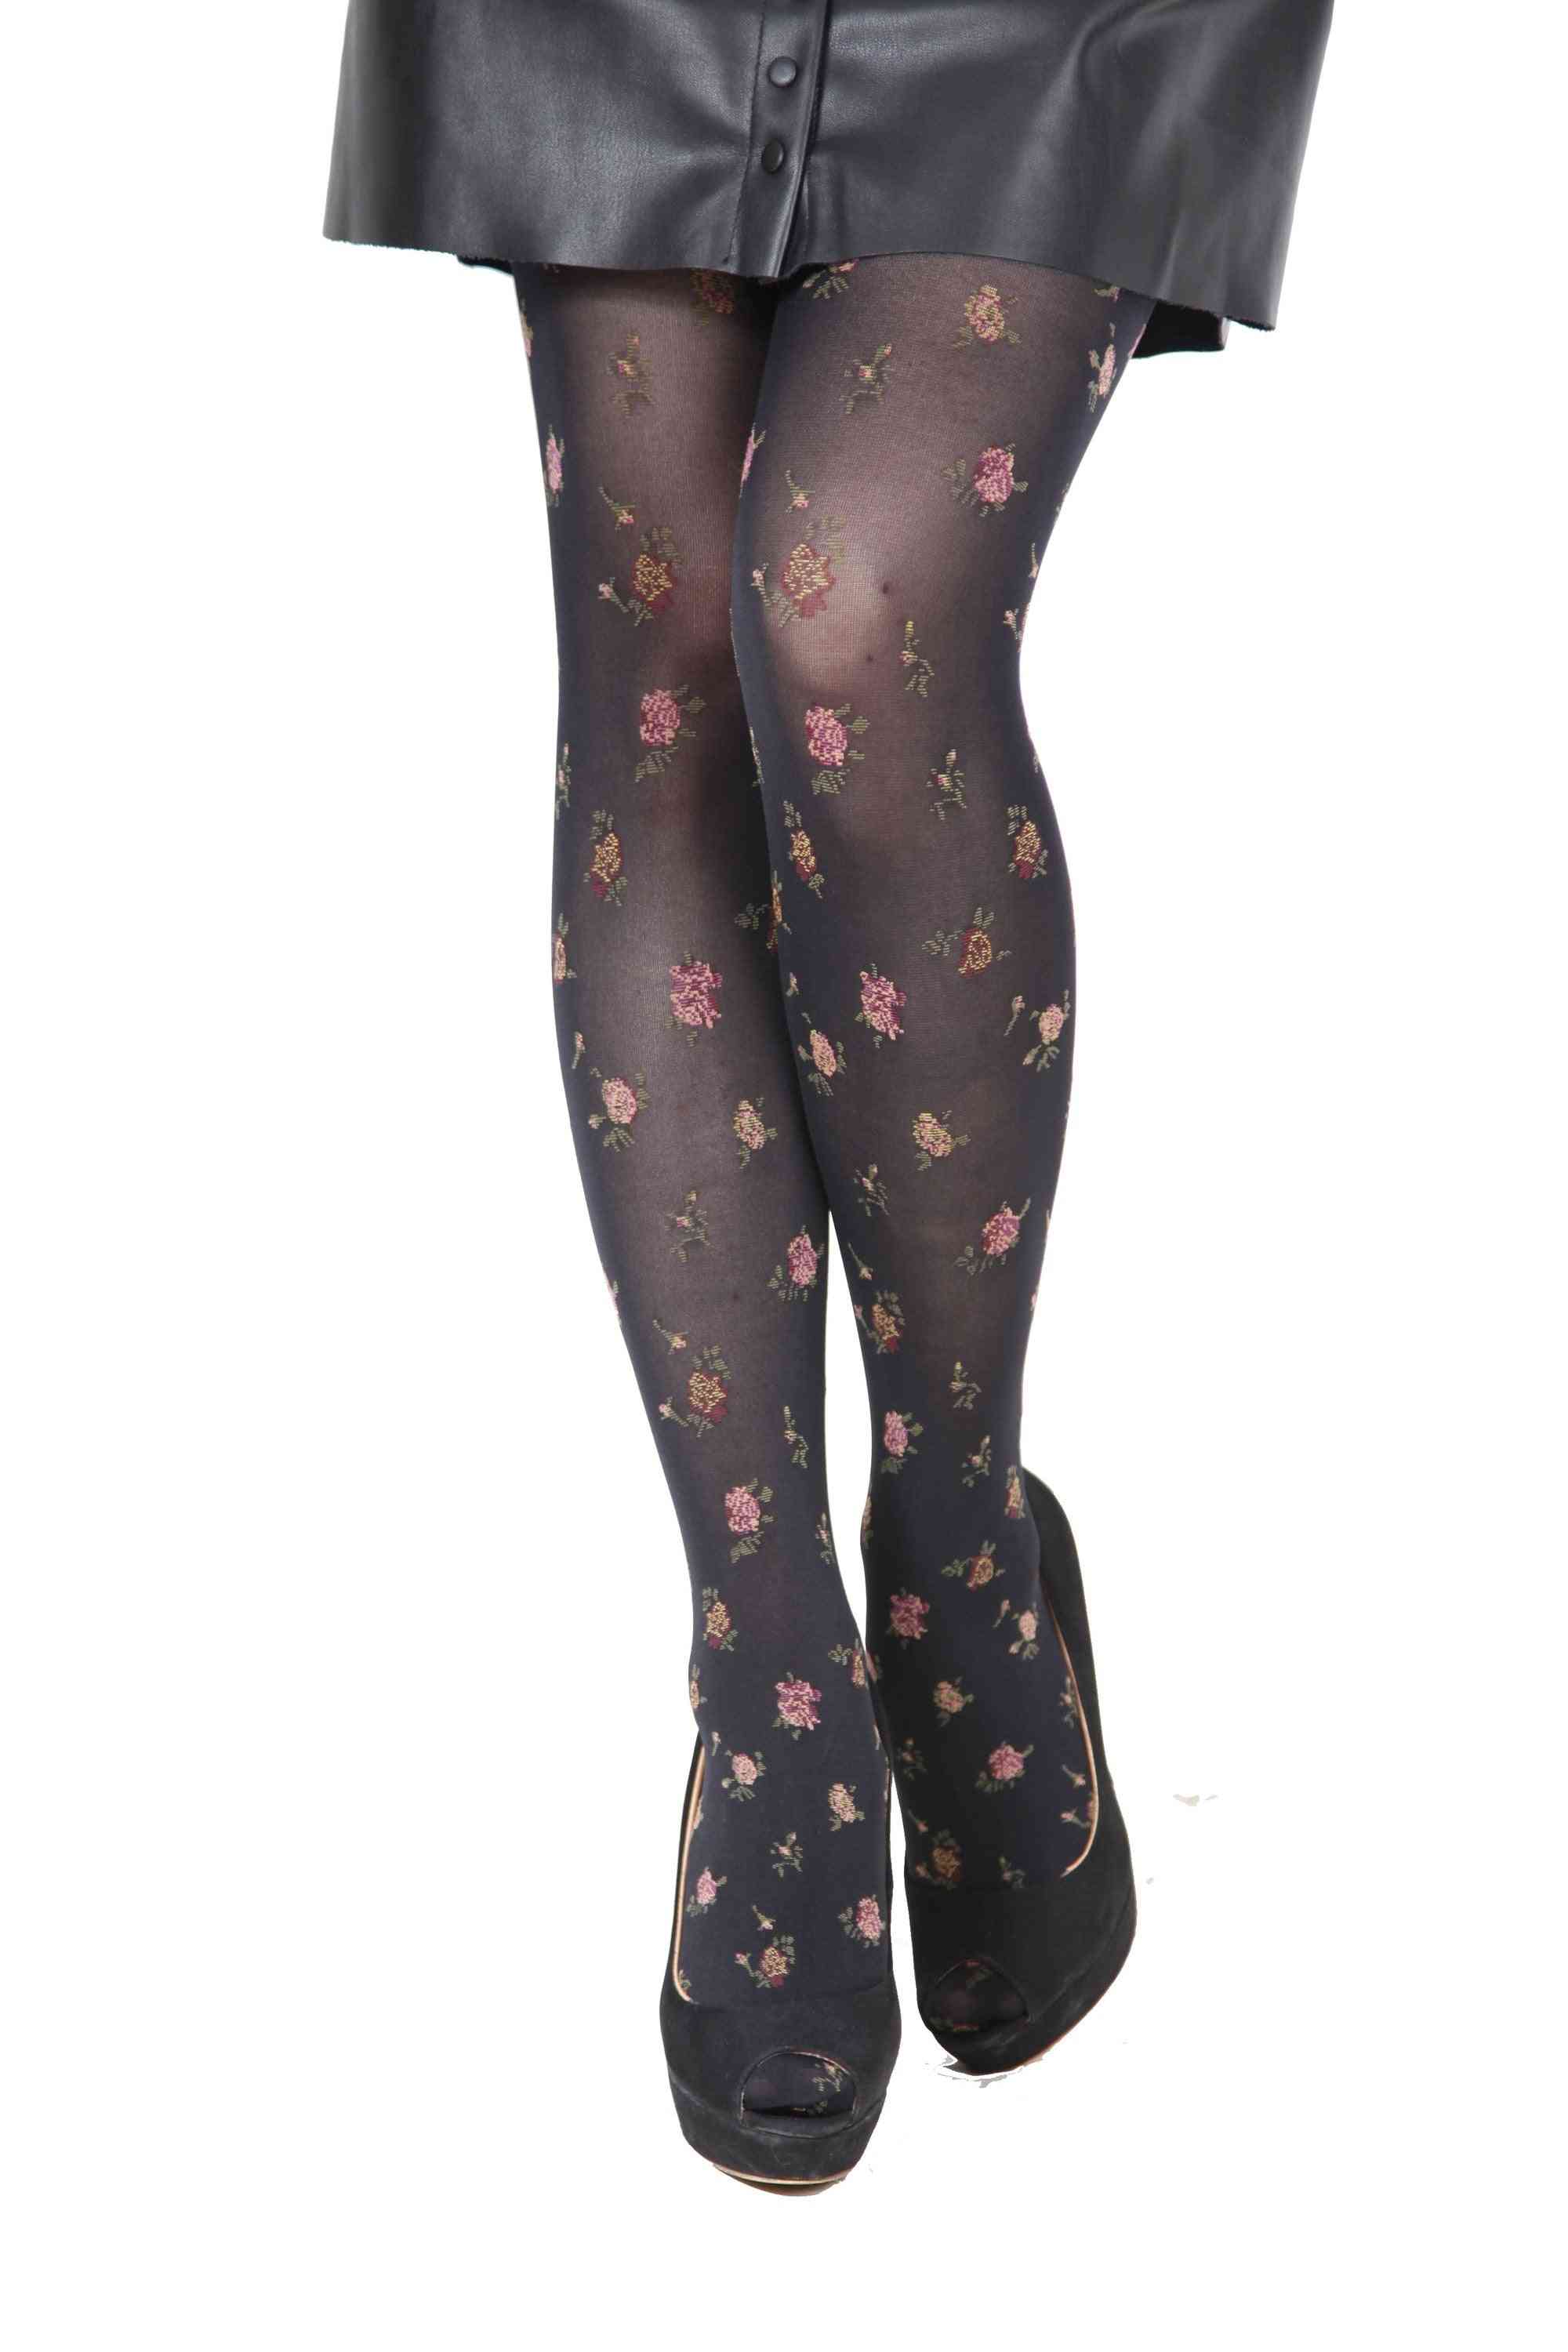 Elegant Decorated With Small Knitted Roses, Tights Legging